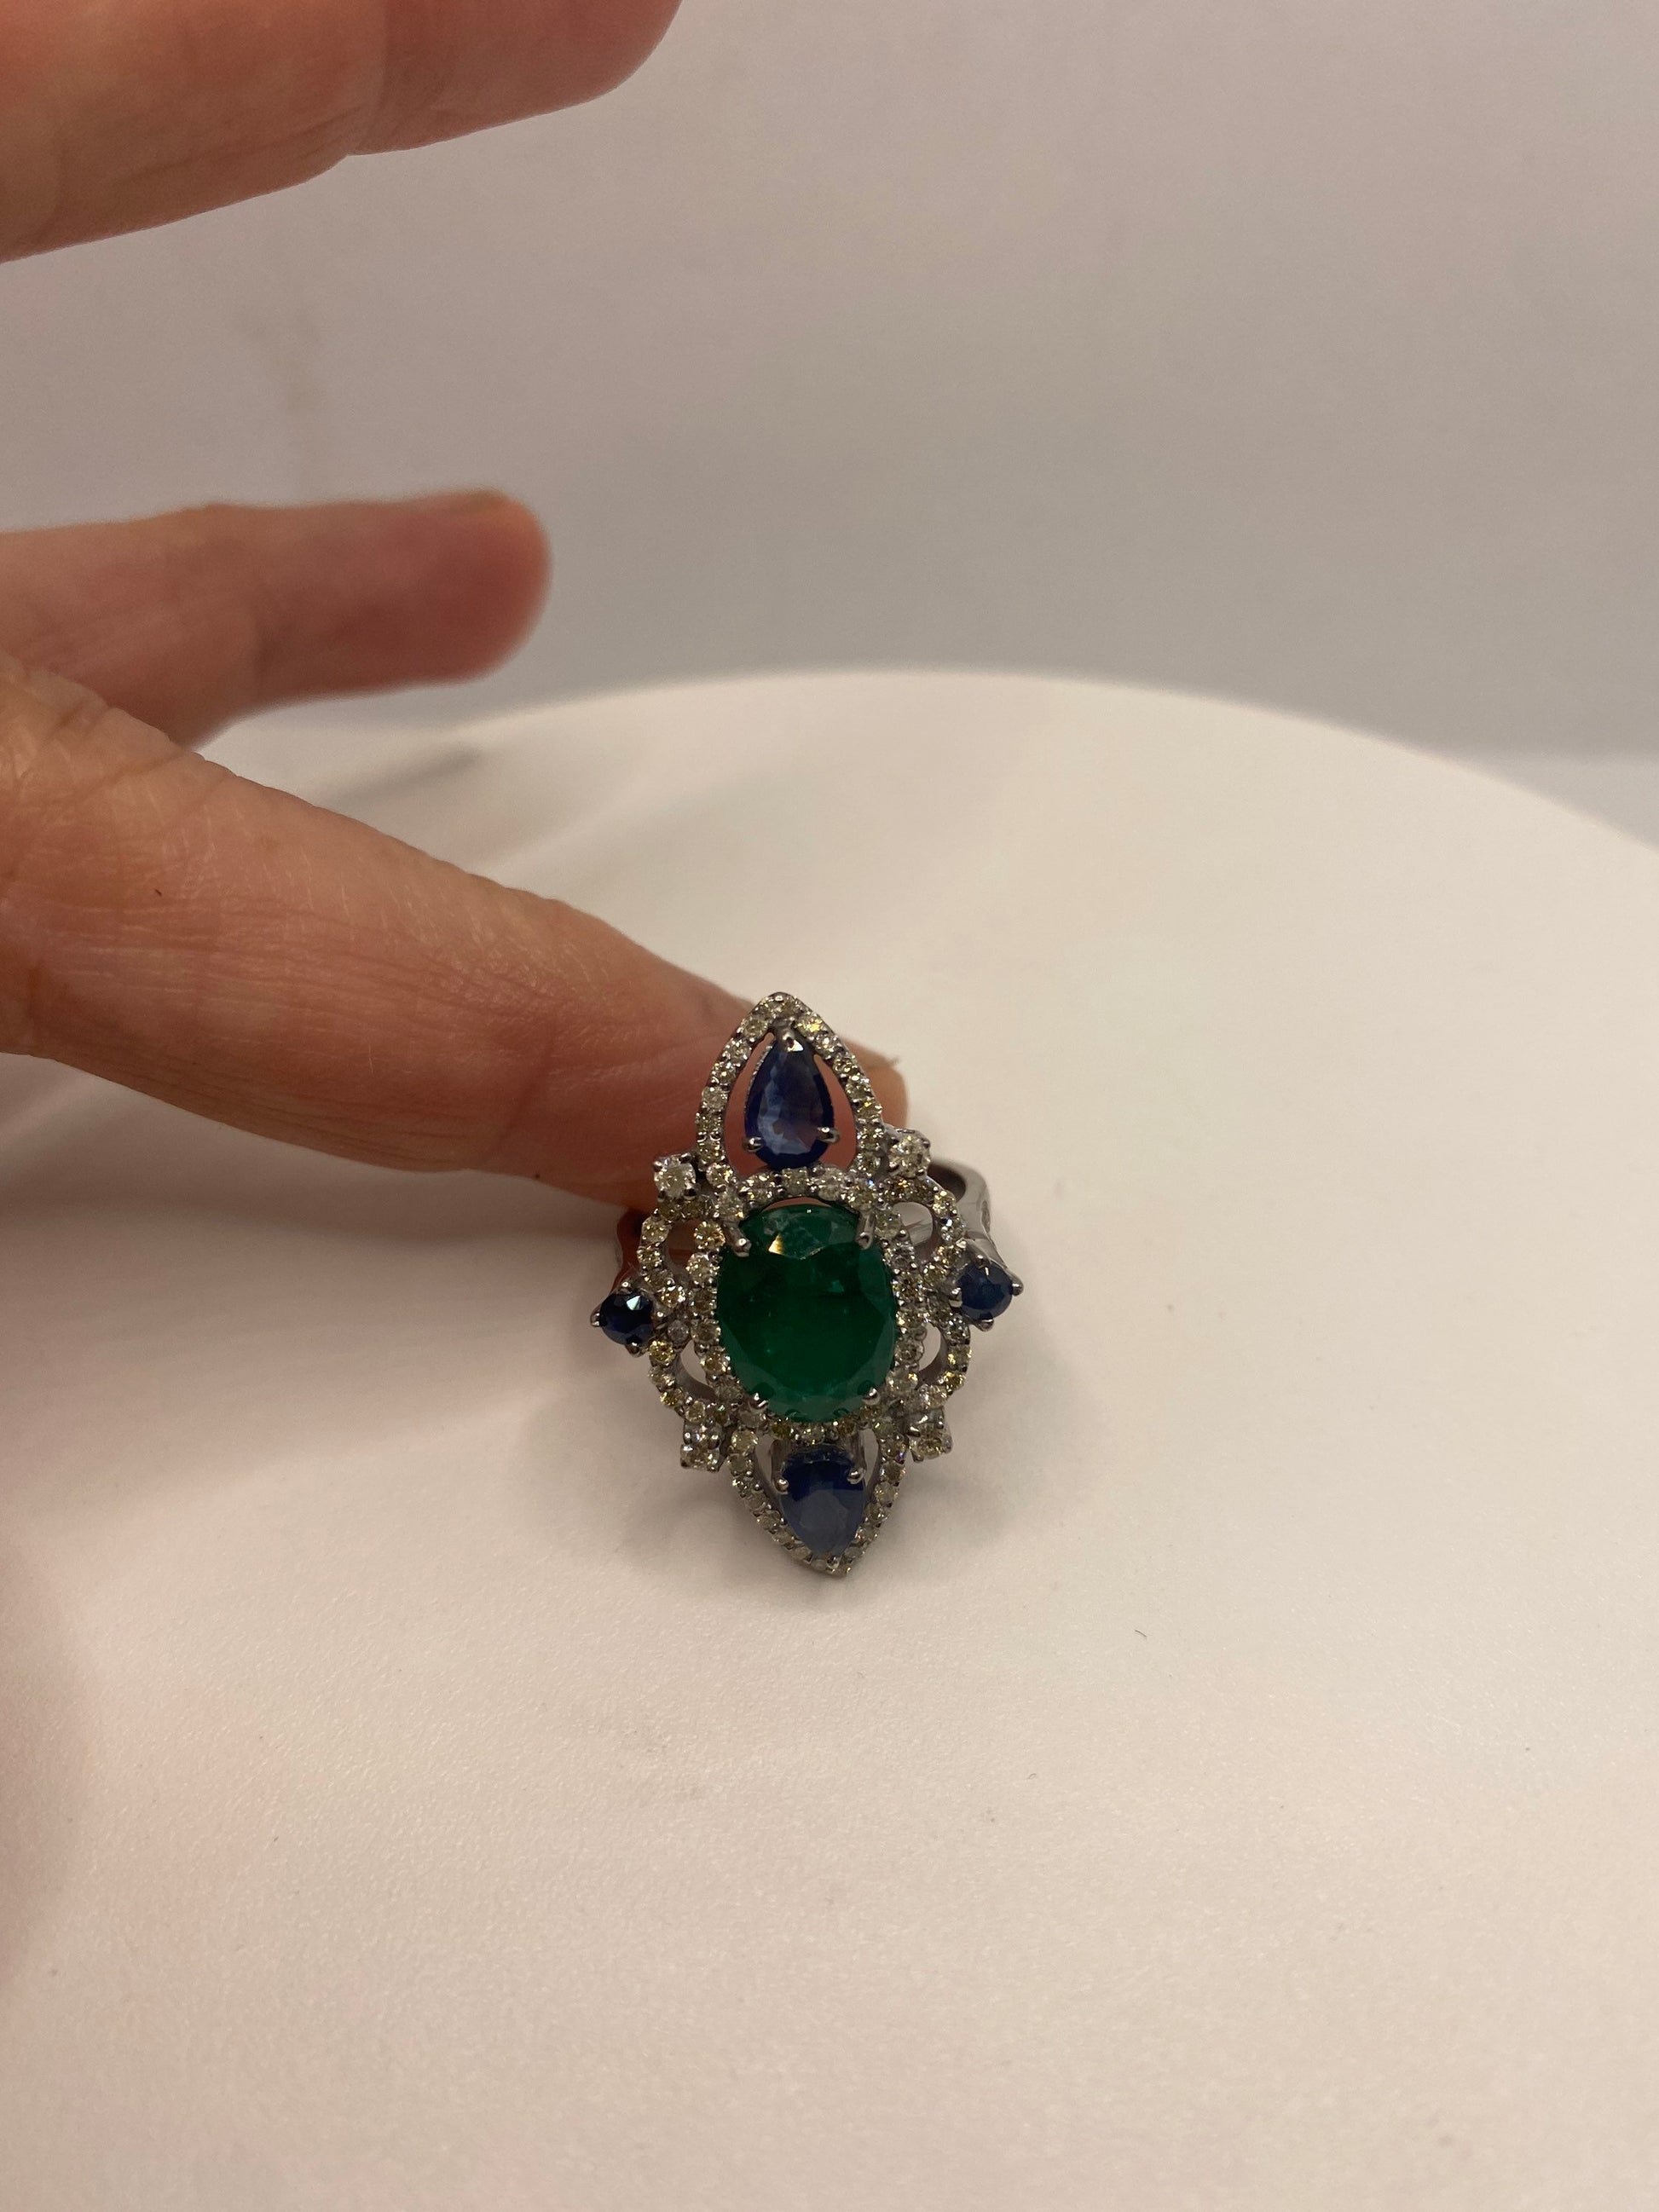 Vintage Emerald Sapphire Diamond Cocktail Ring 925 Sterling Silver Size 7